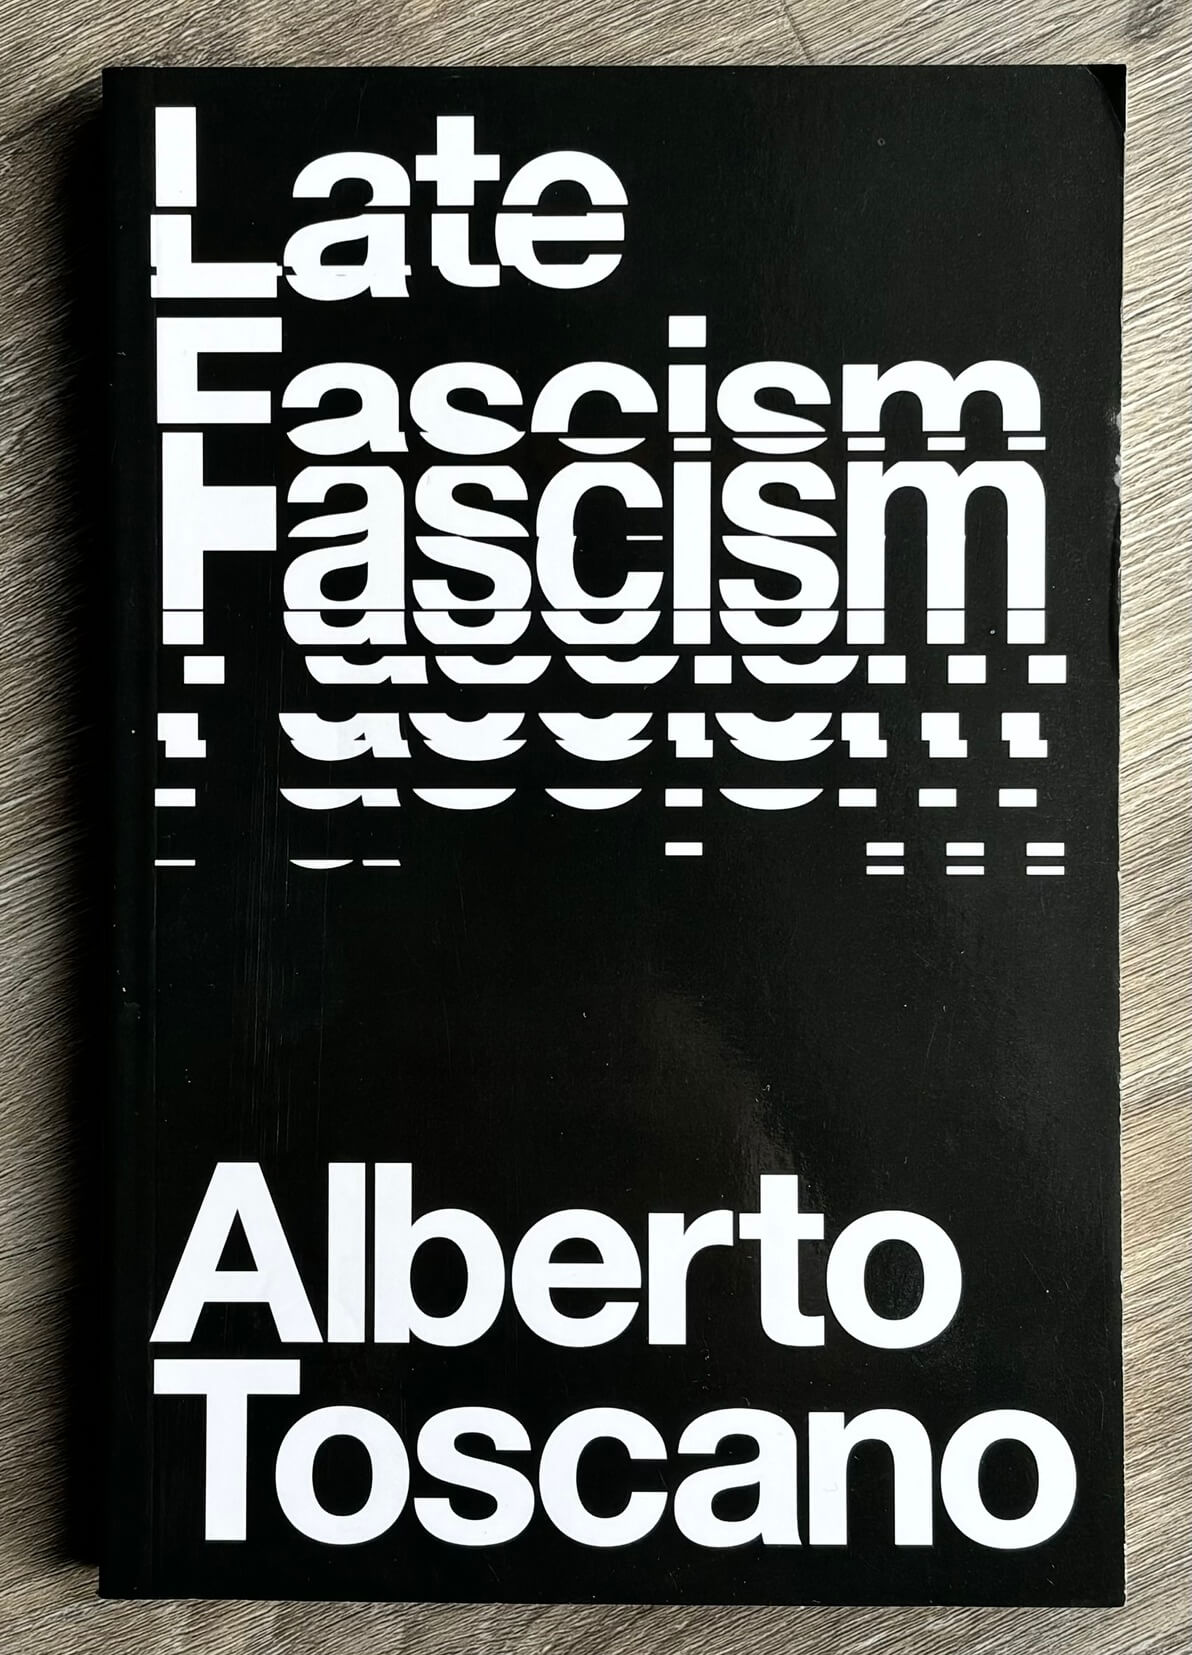 “Late Fascism” by Alberto Toscano